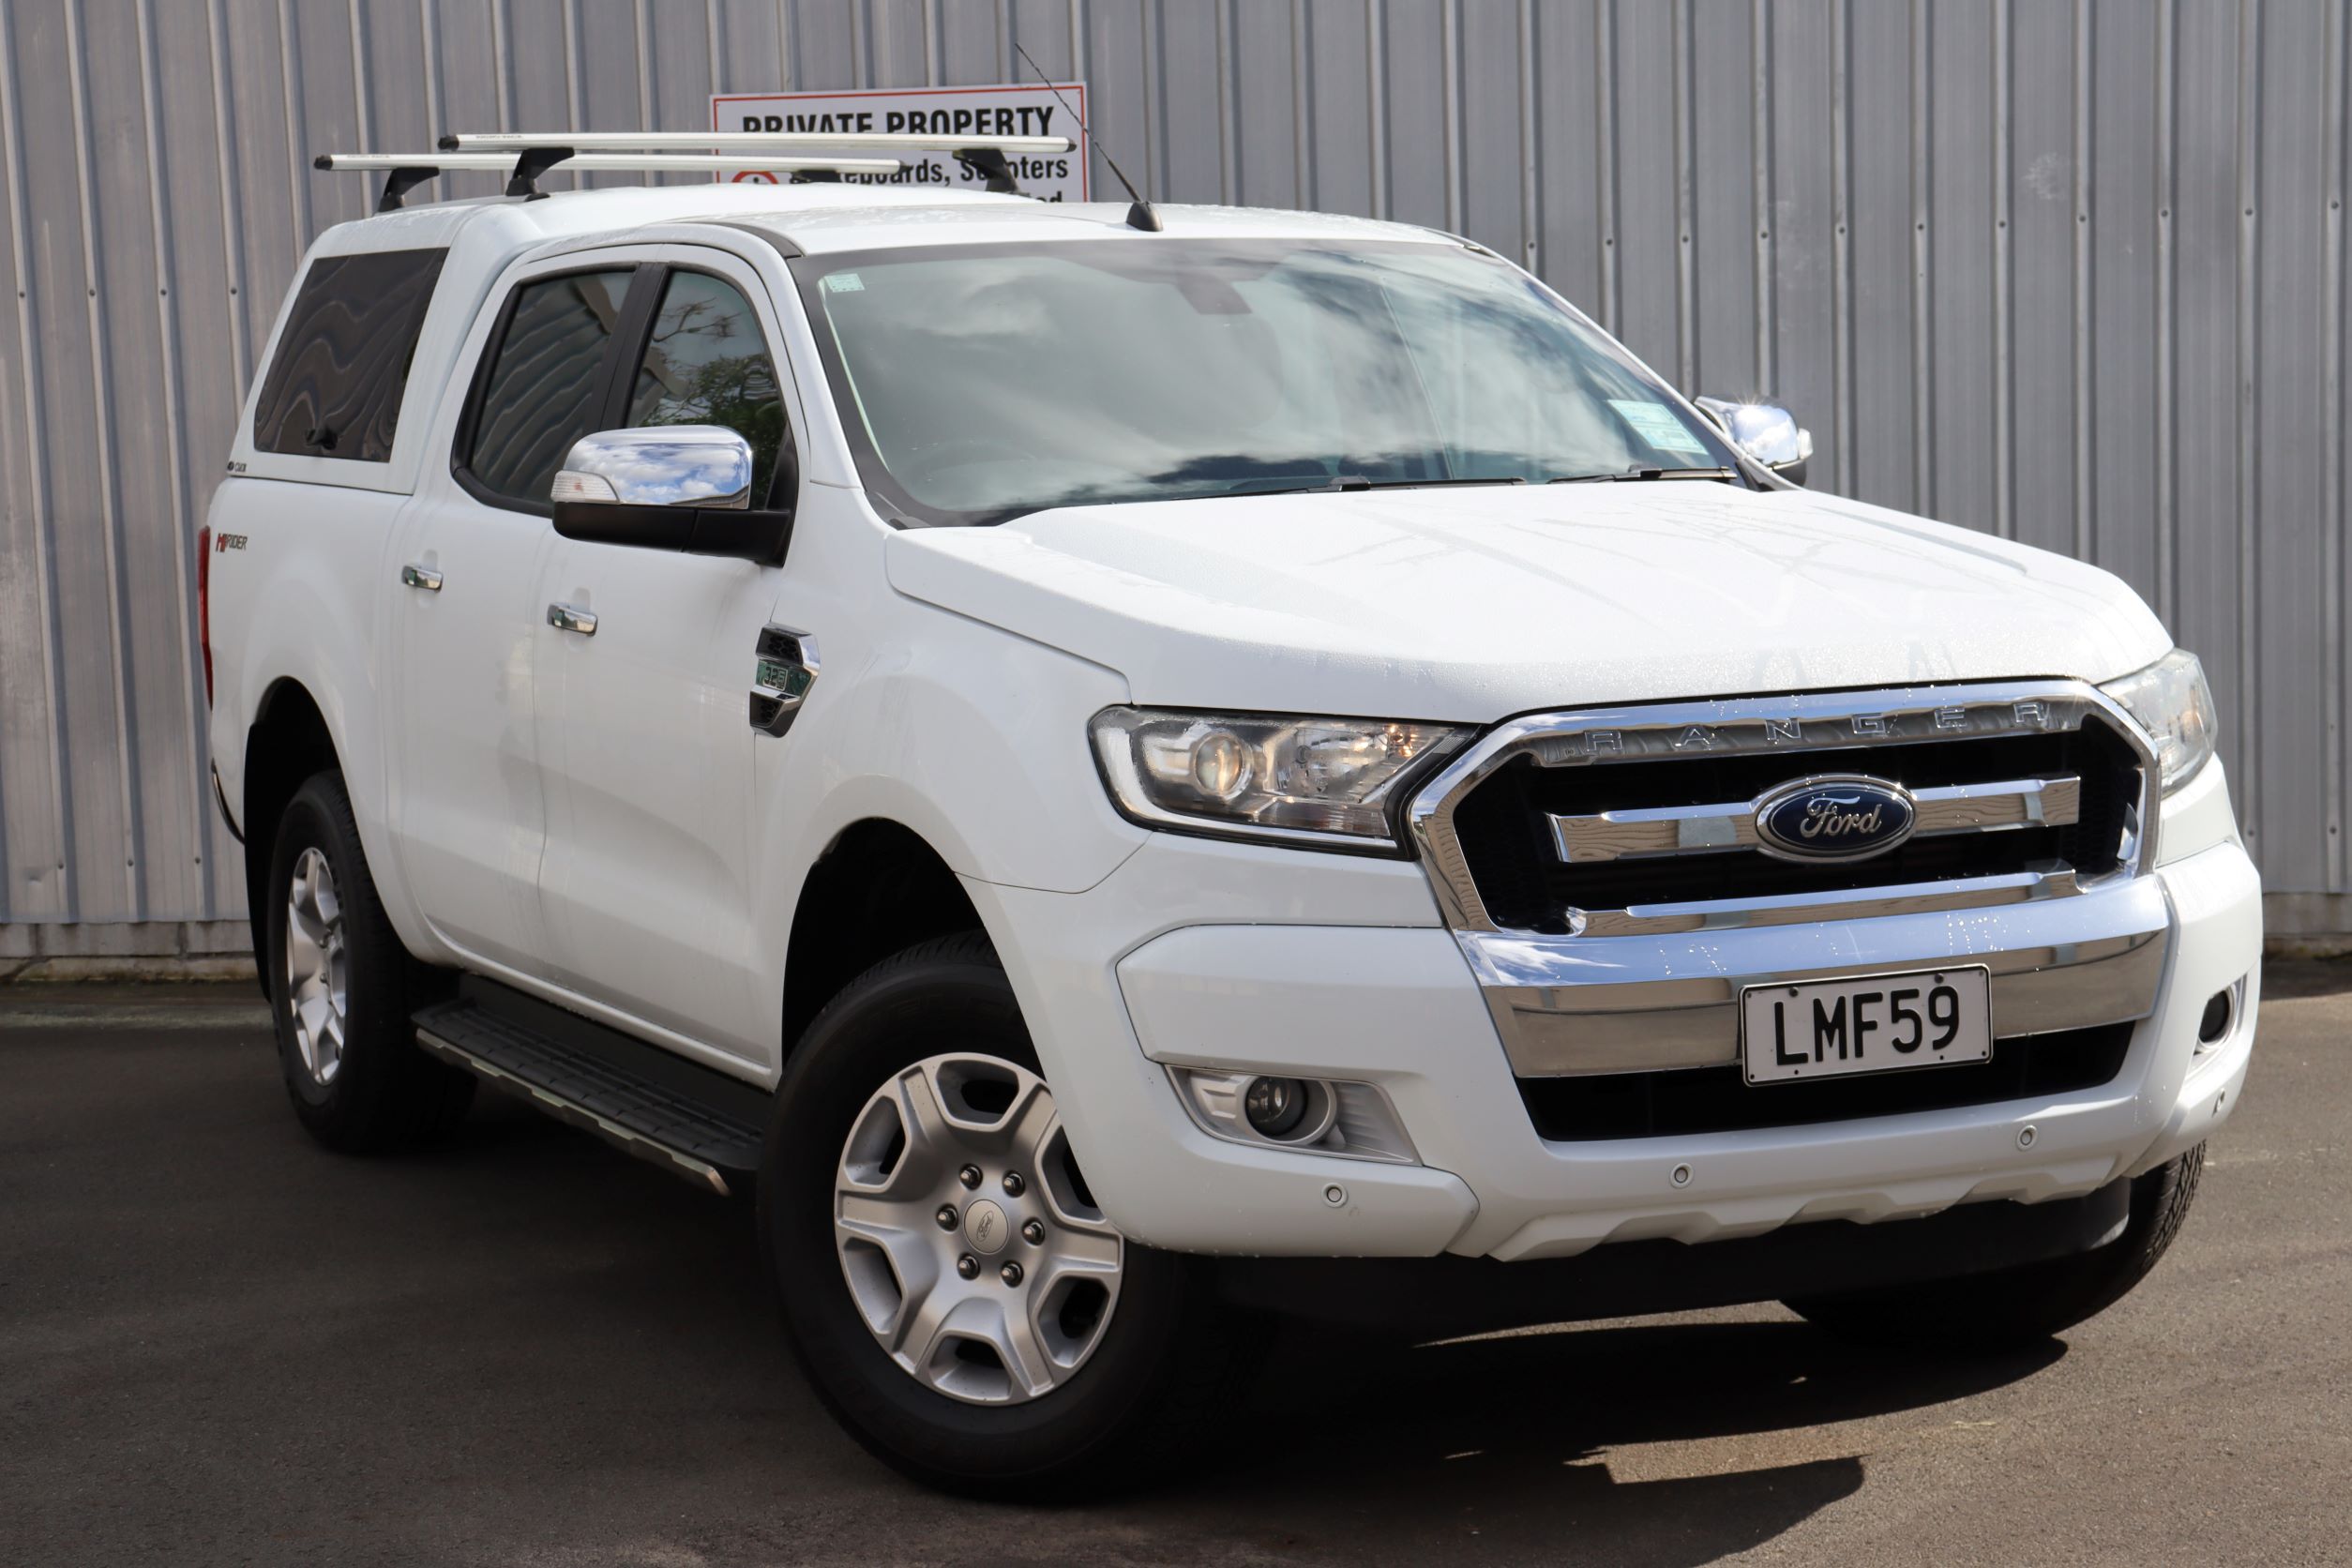 Ford Ranger XLT AUTO 2018 for sale in Auckland